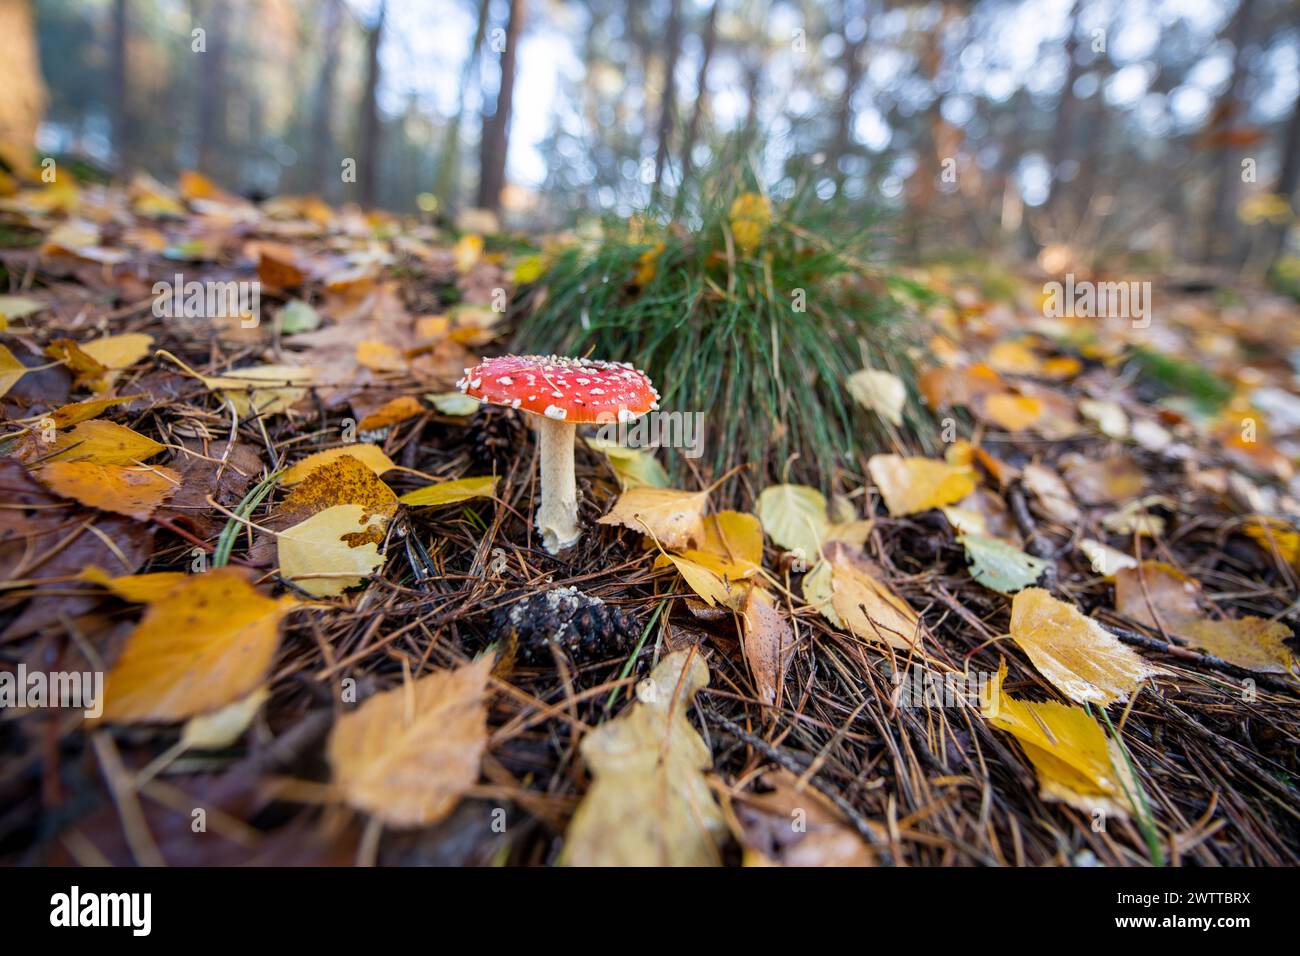 A vibrant red mushroom stands out amid autumn leaves on the forest floor. Stock Photo